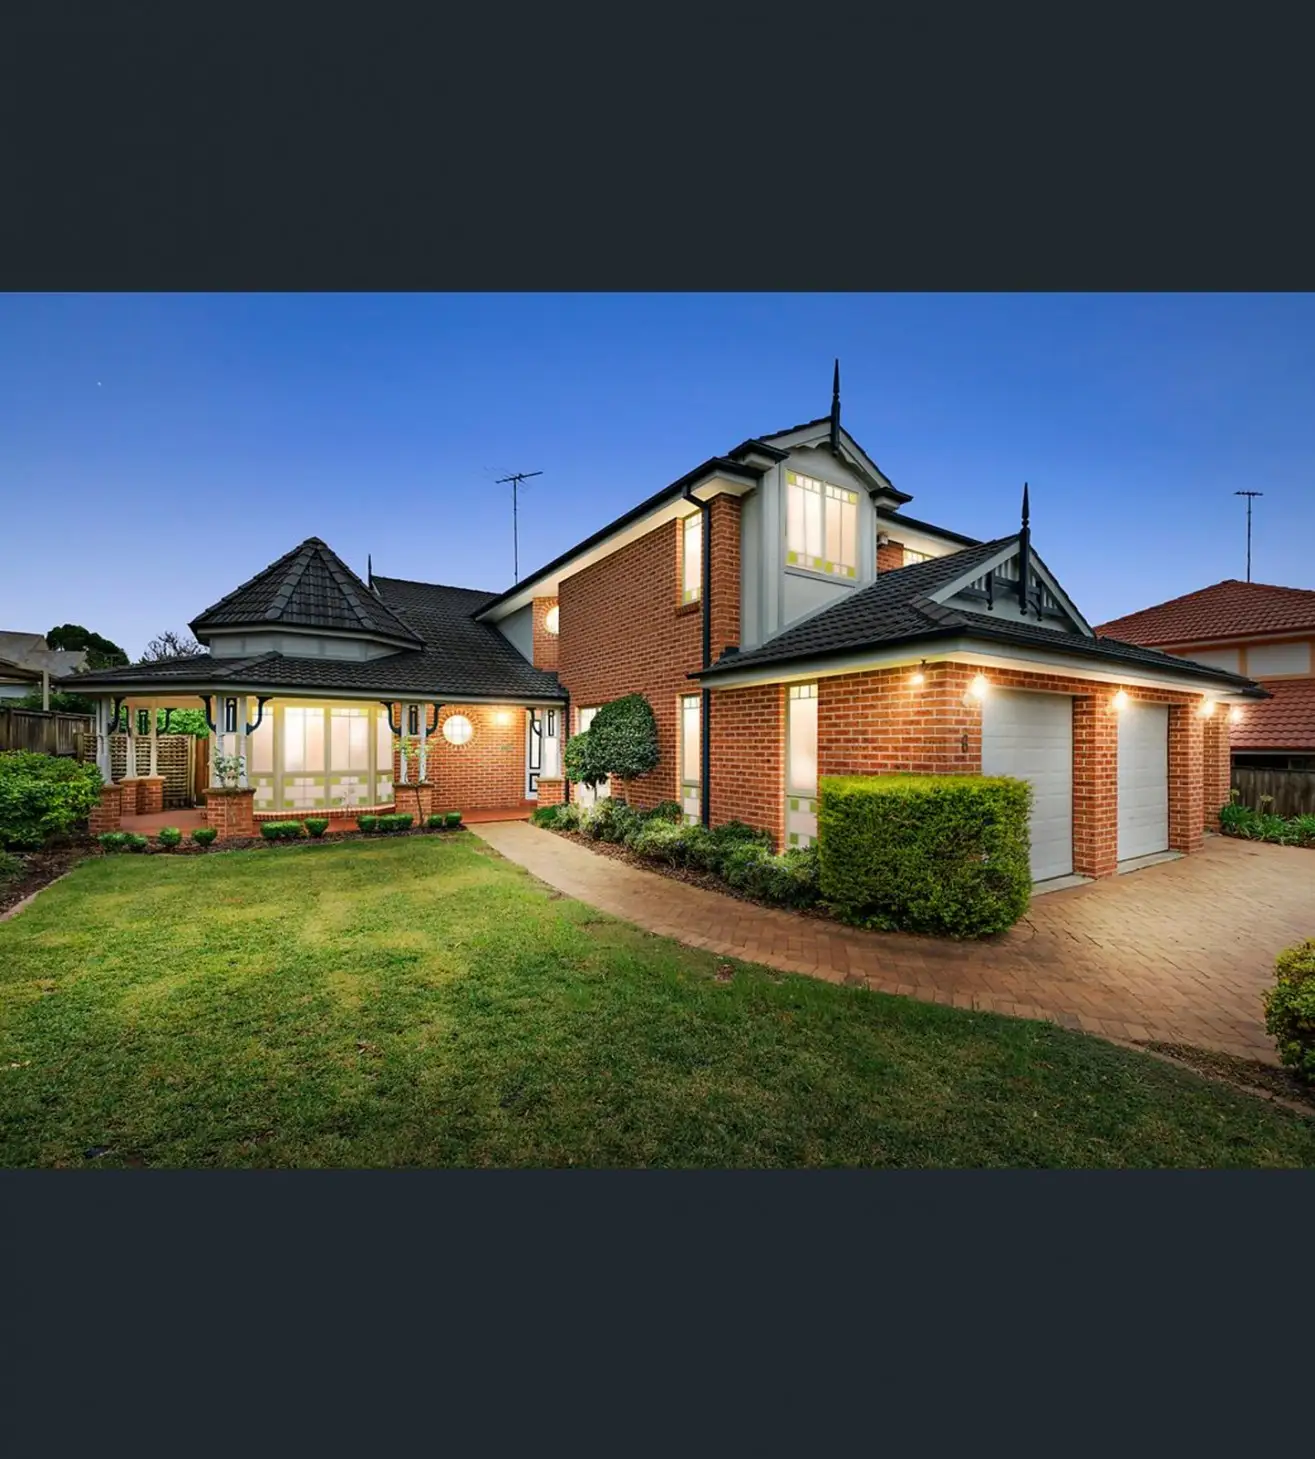 Photo #1: 6 Cattai Creek Drive, Kellyville - Sold by Sydney Sotheby's International Realty